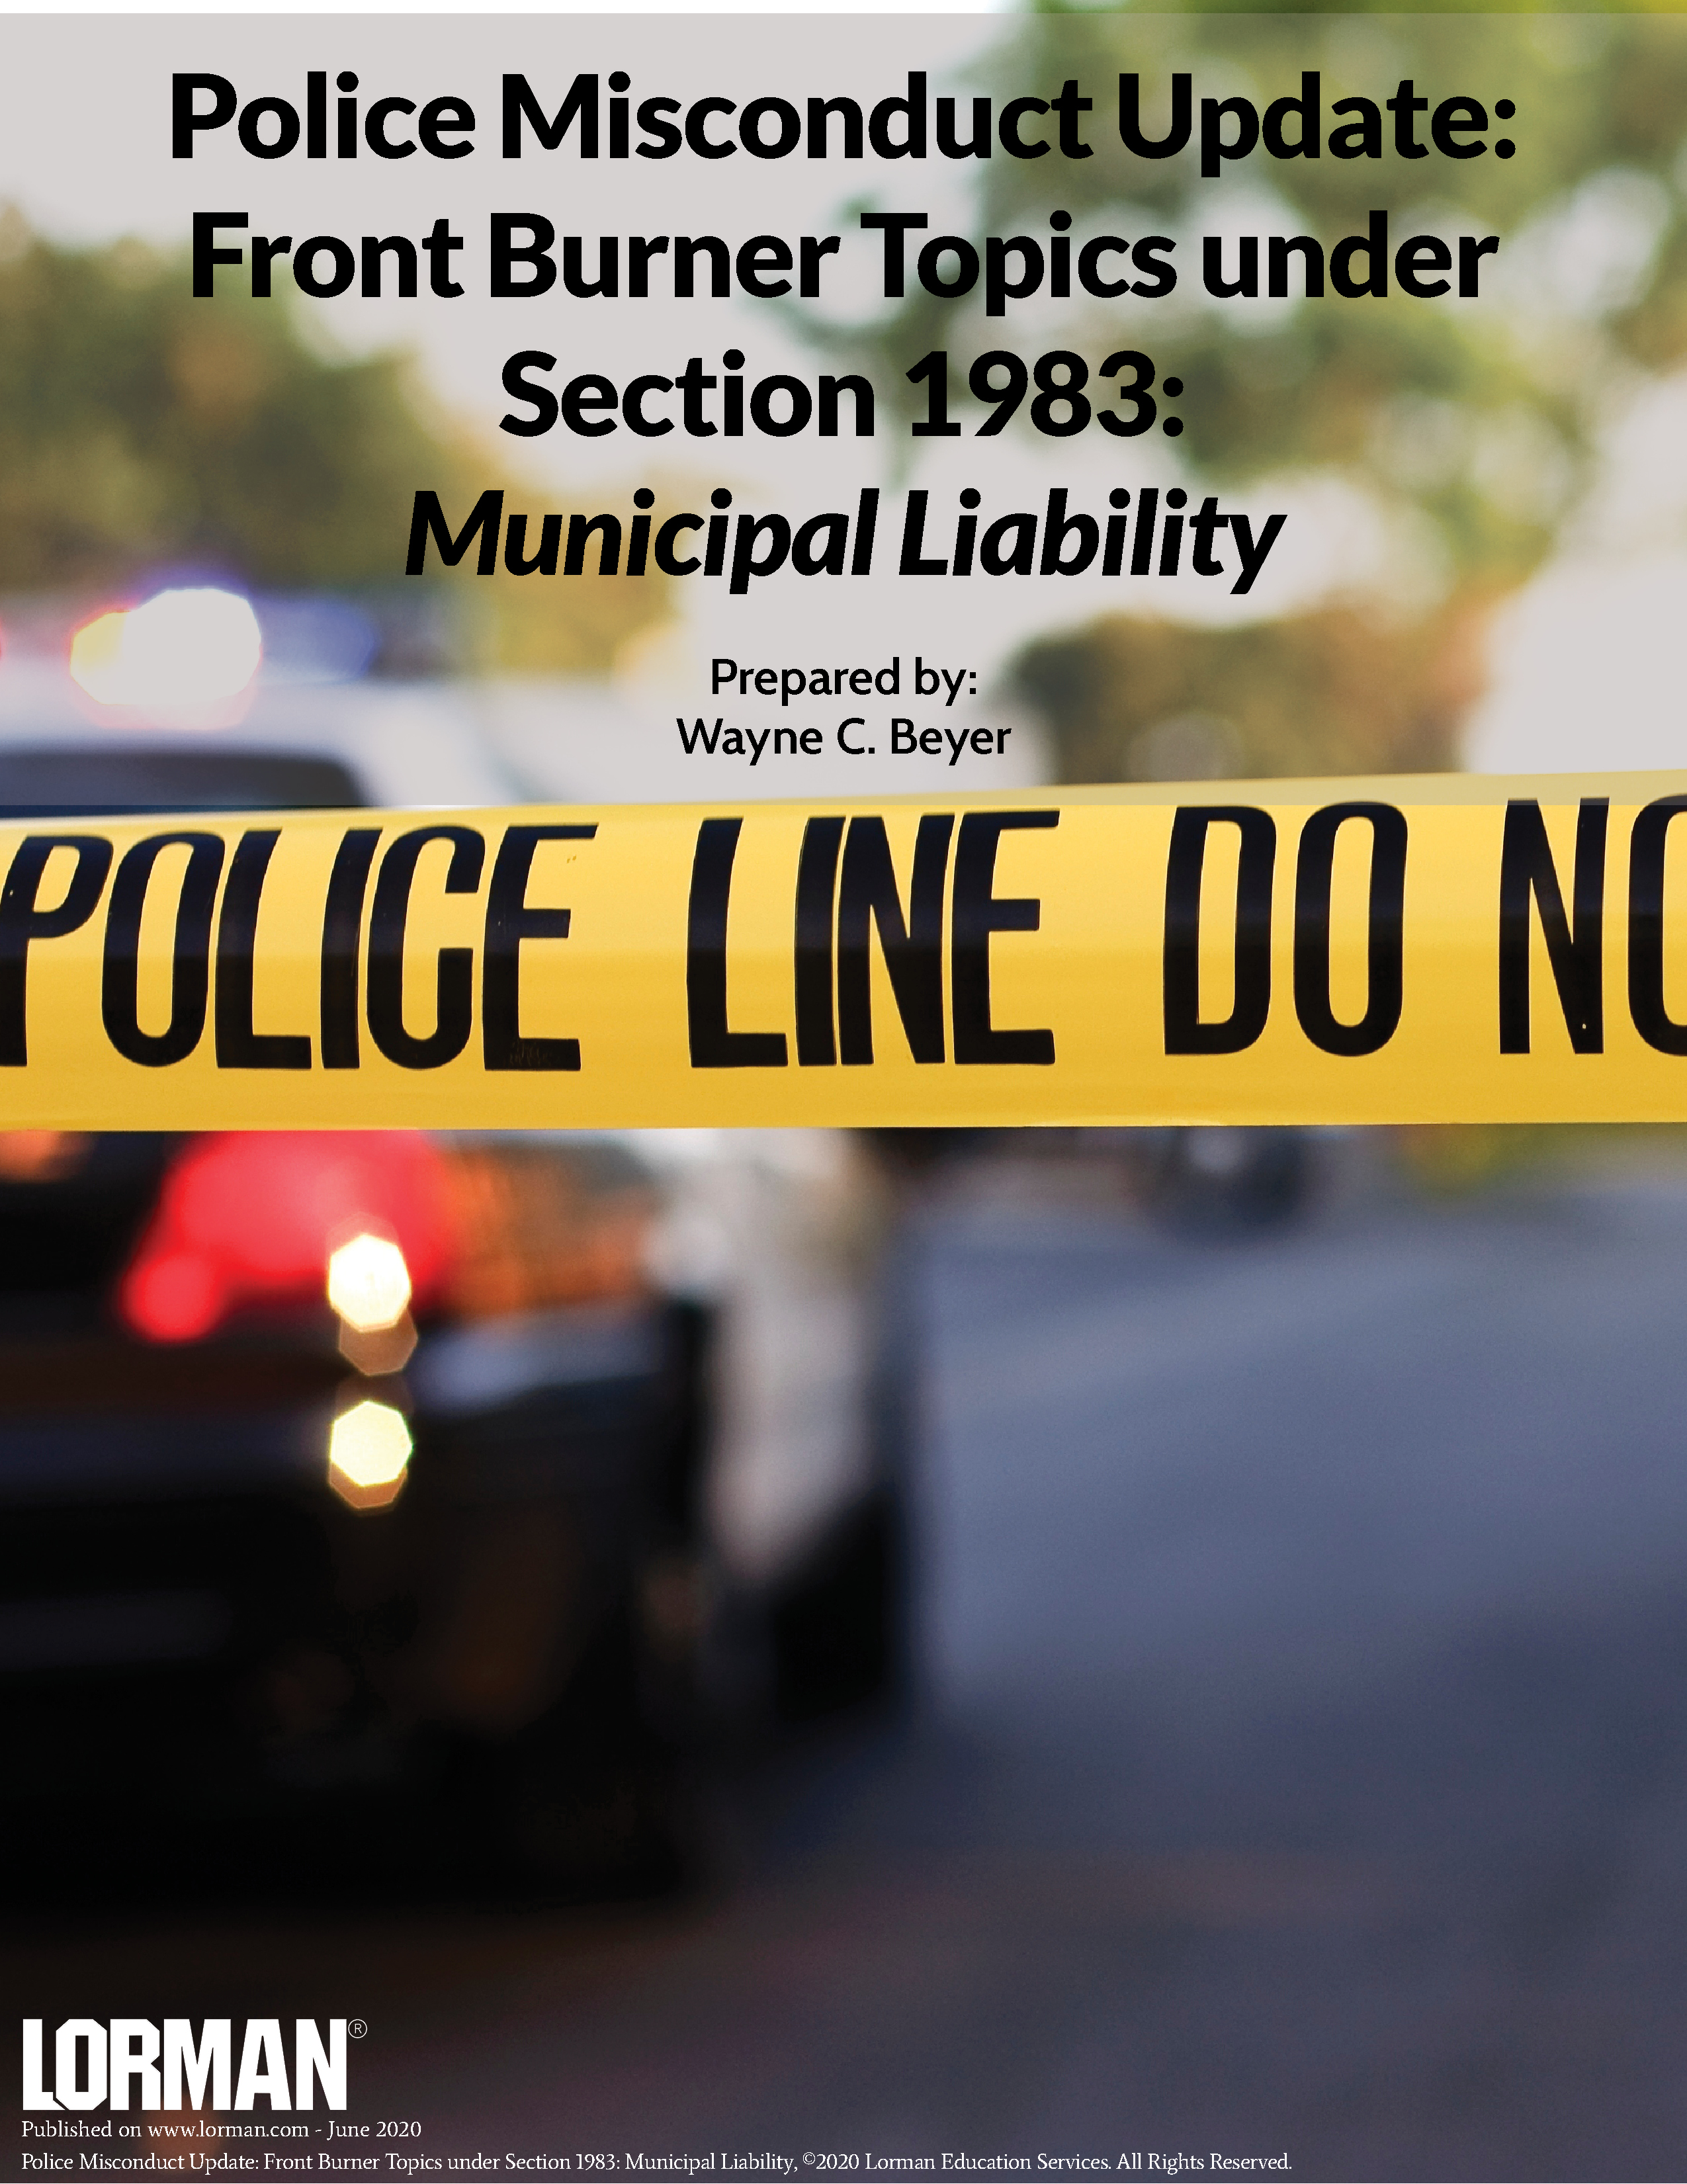 Police Misconduct Update: Front Burner Topics under Section 1983: Municipal Liability